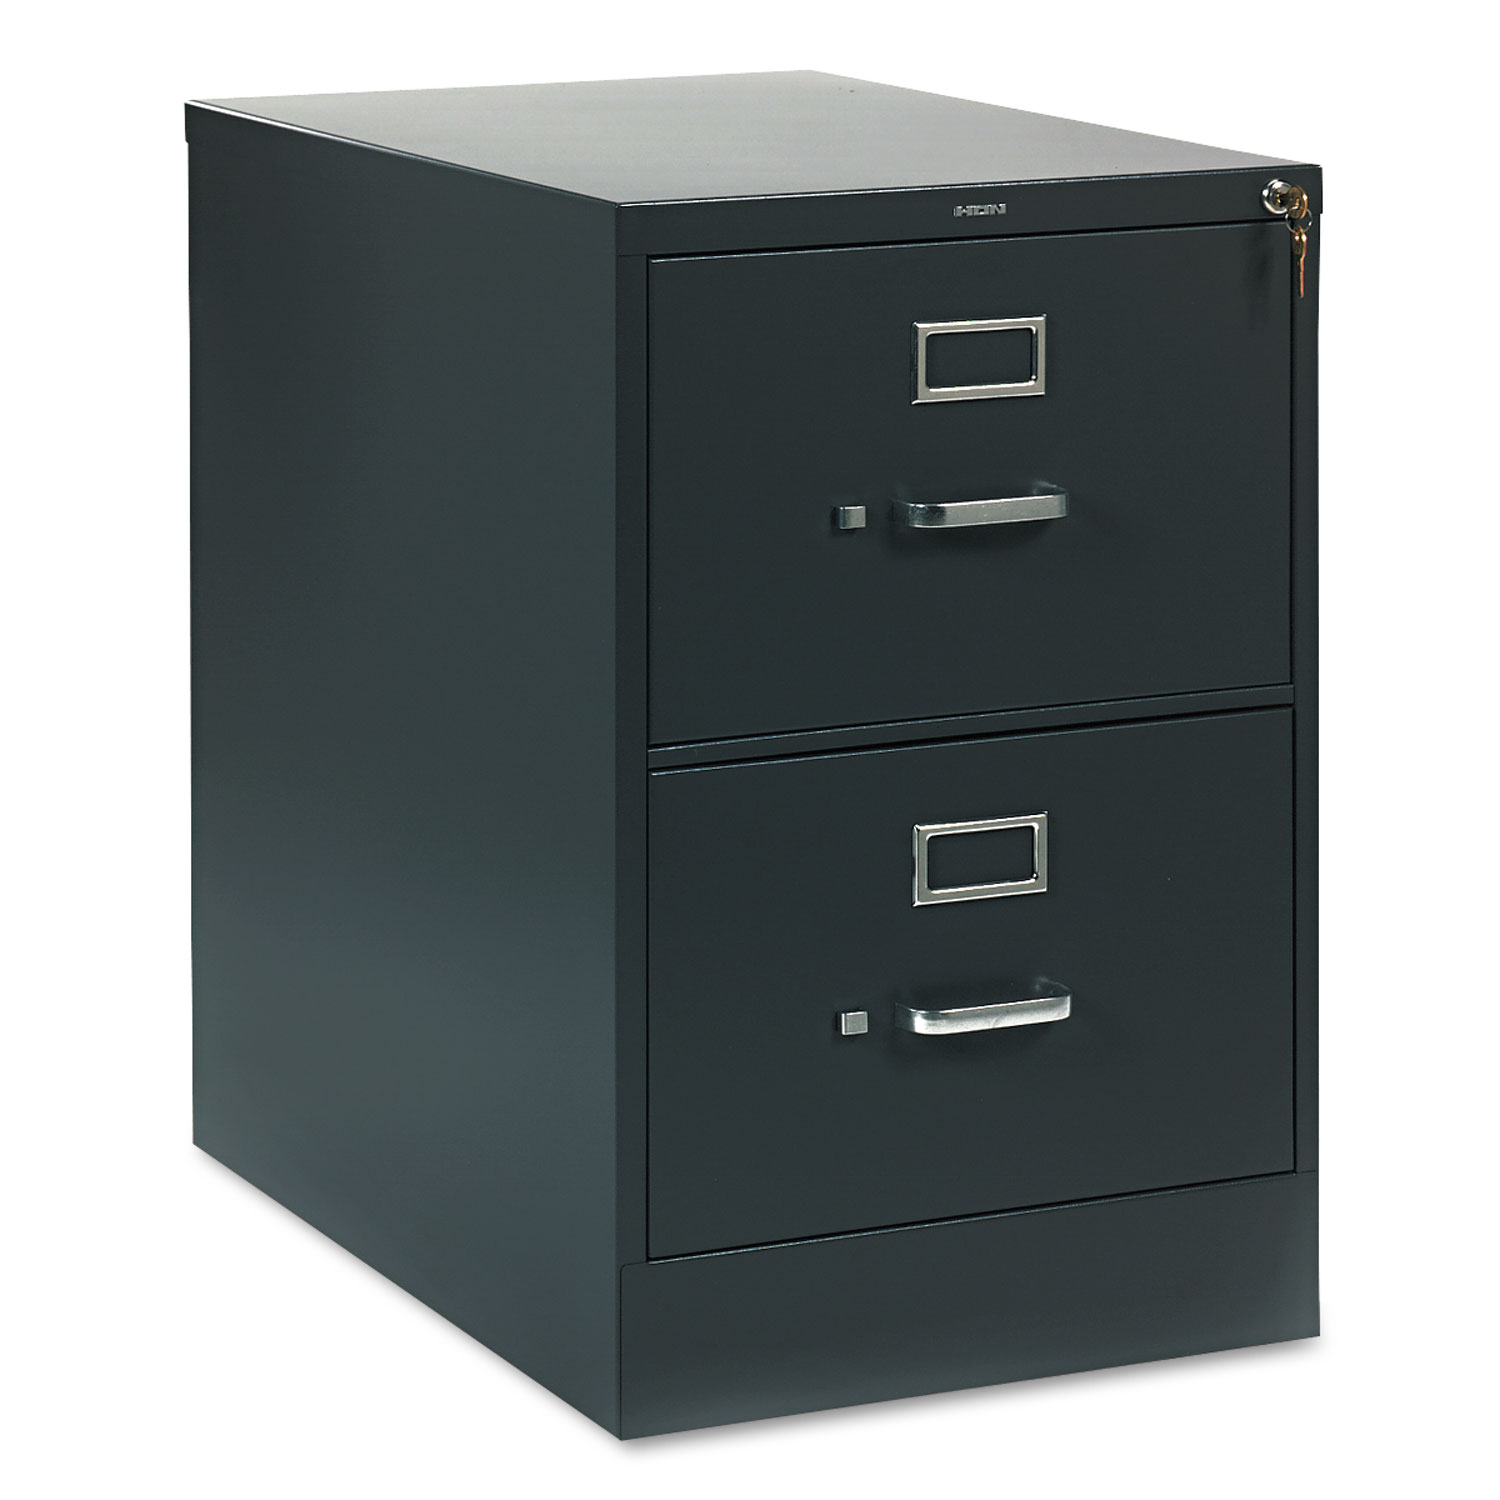  HON H312C.P.S 310 Series Two-Drawer Full-Suspension File, Legal, 18.25w x 26.5d x 29h, Charcoal (HON312CPS) 